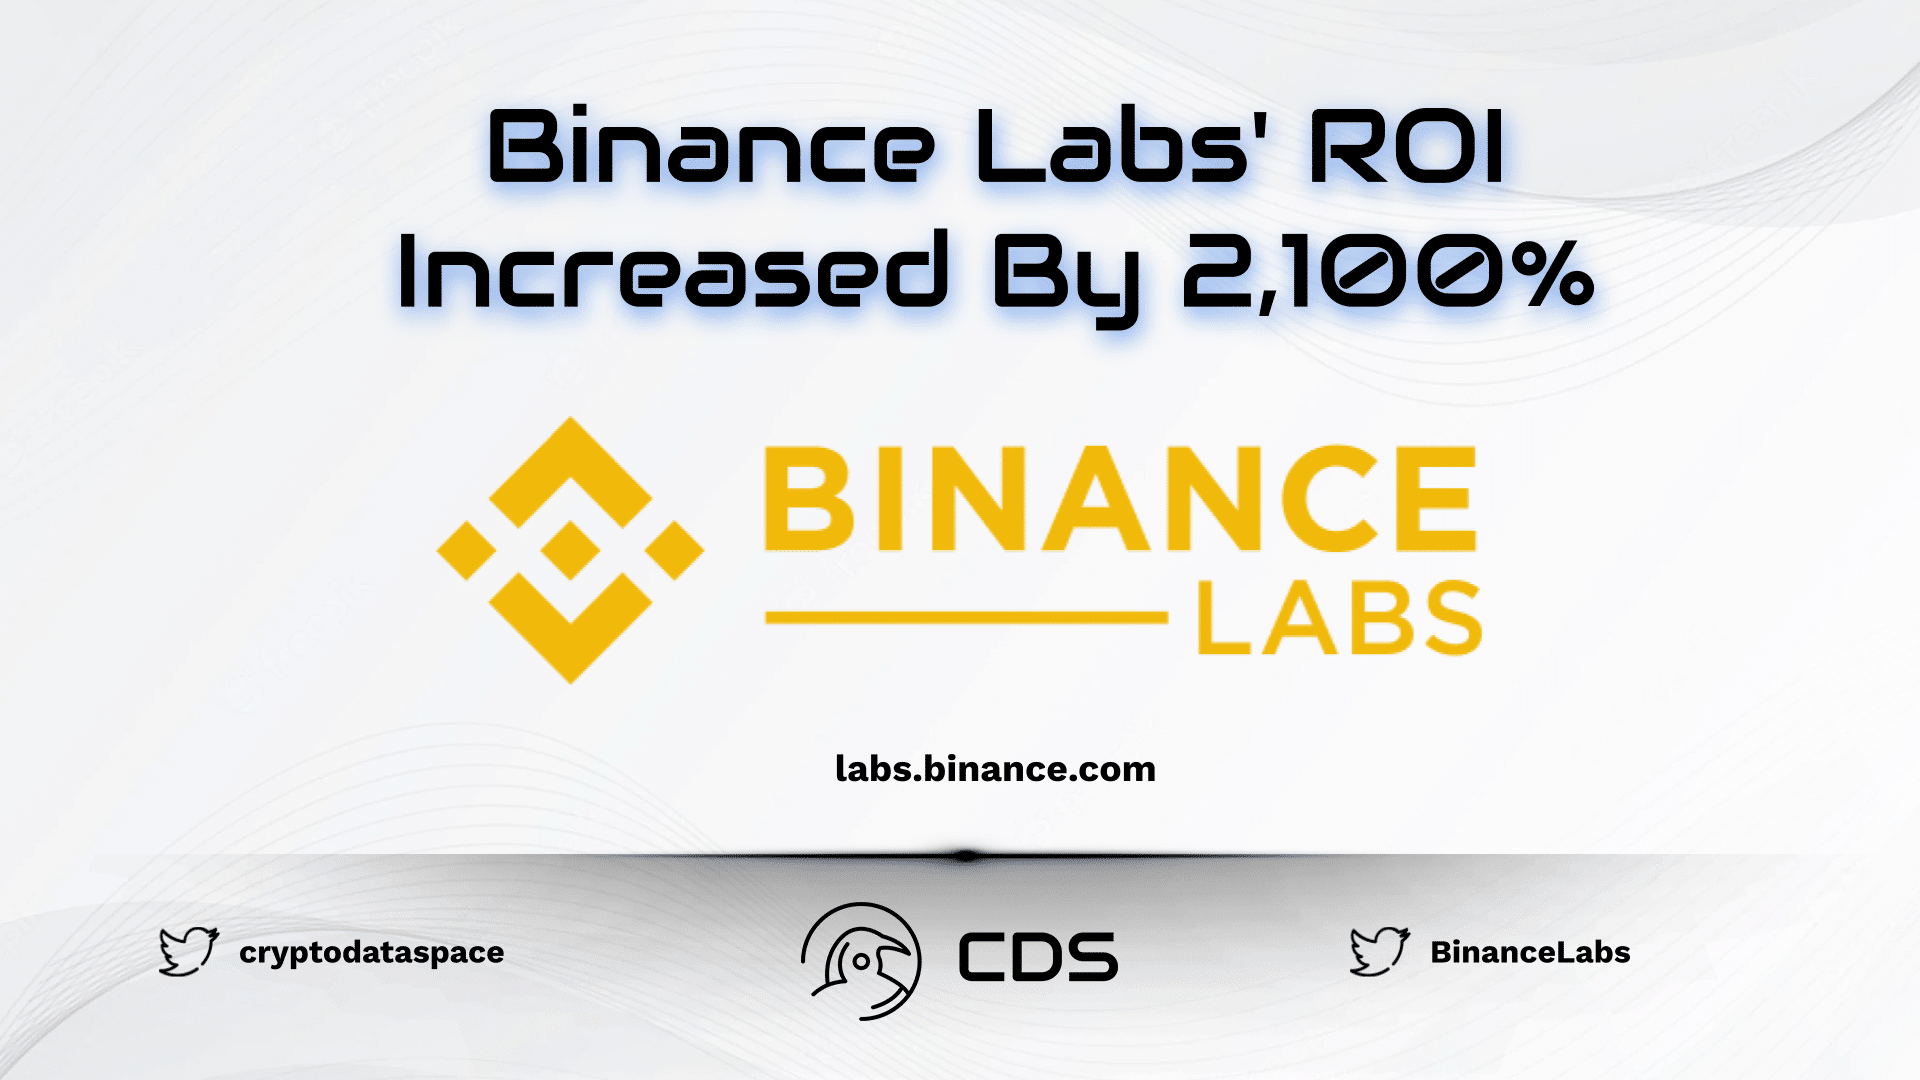 Binance Labs' ROI Increased By 2,100%